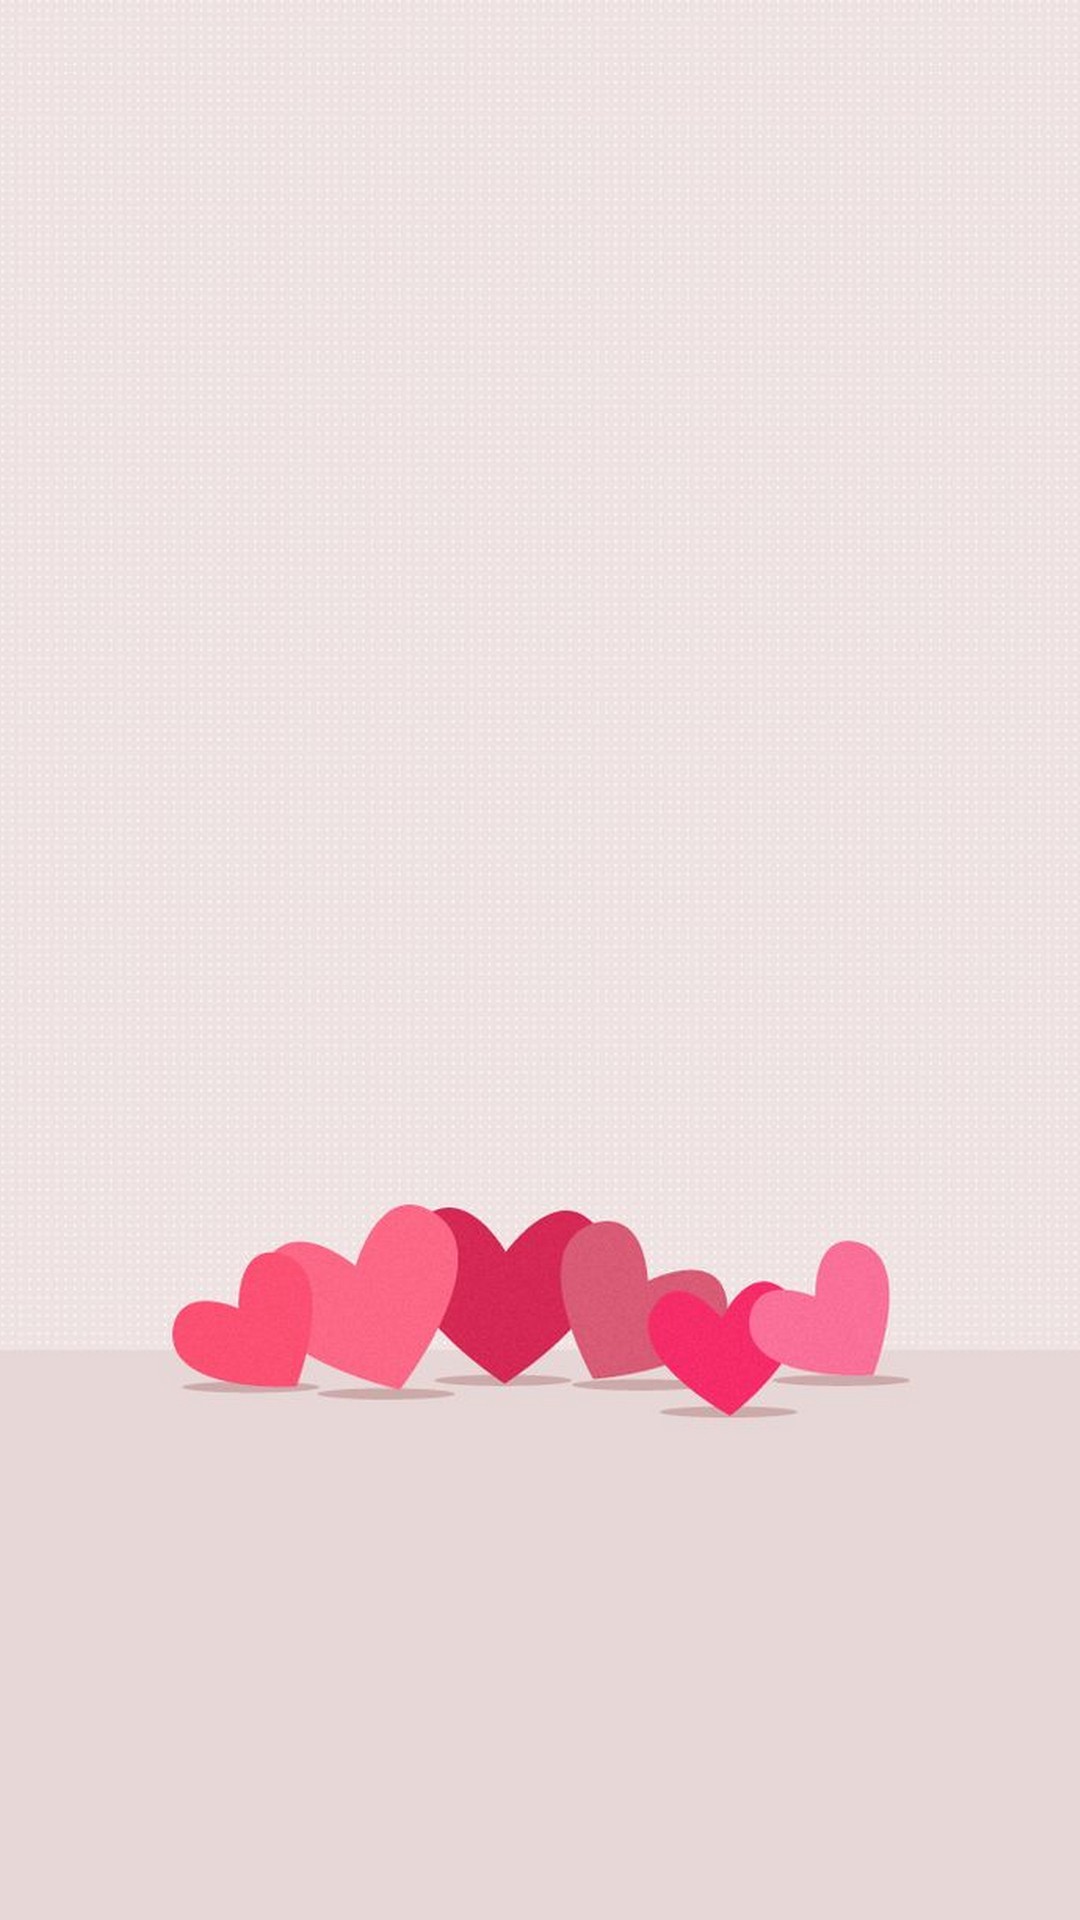 Valentine Wallpaper For Android Phone resolution 1080x1920